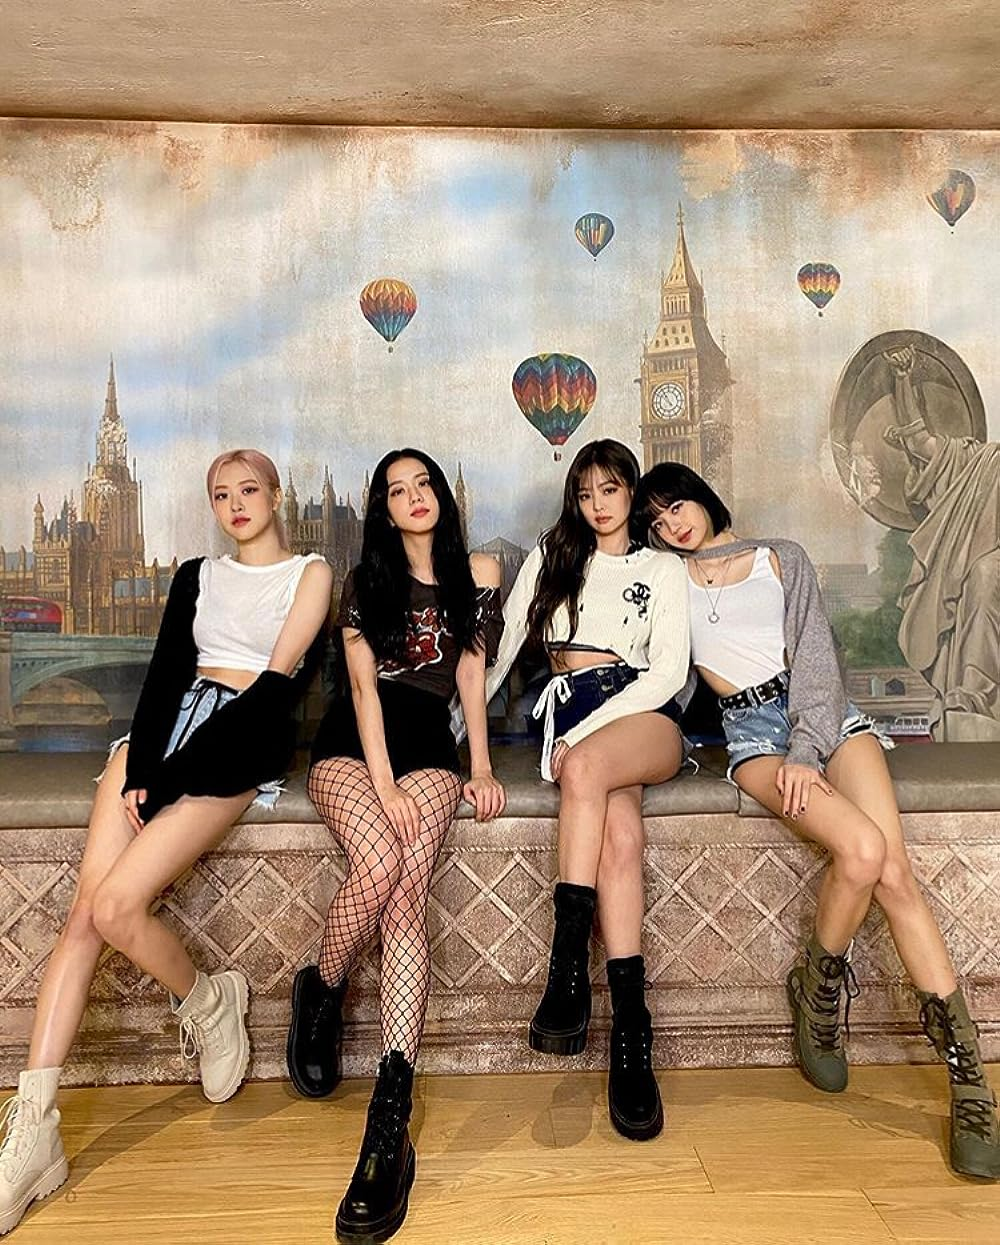 BLACKPINK's THE ALBUM becomes the First Album by a K-pop Act to spend  1,000 days on the Worldwide iTunes Albums Chart